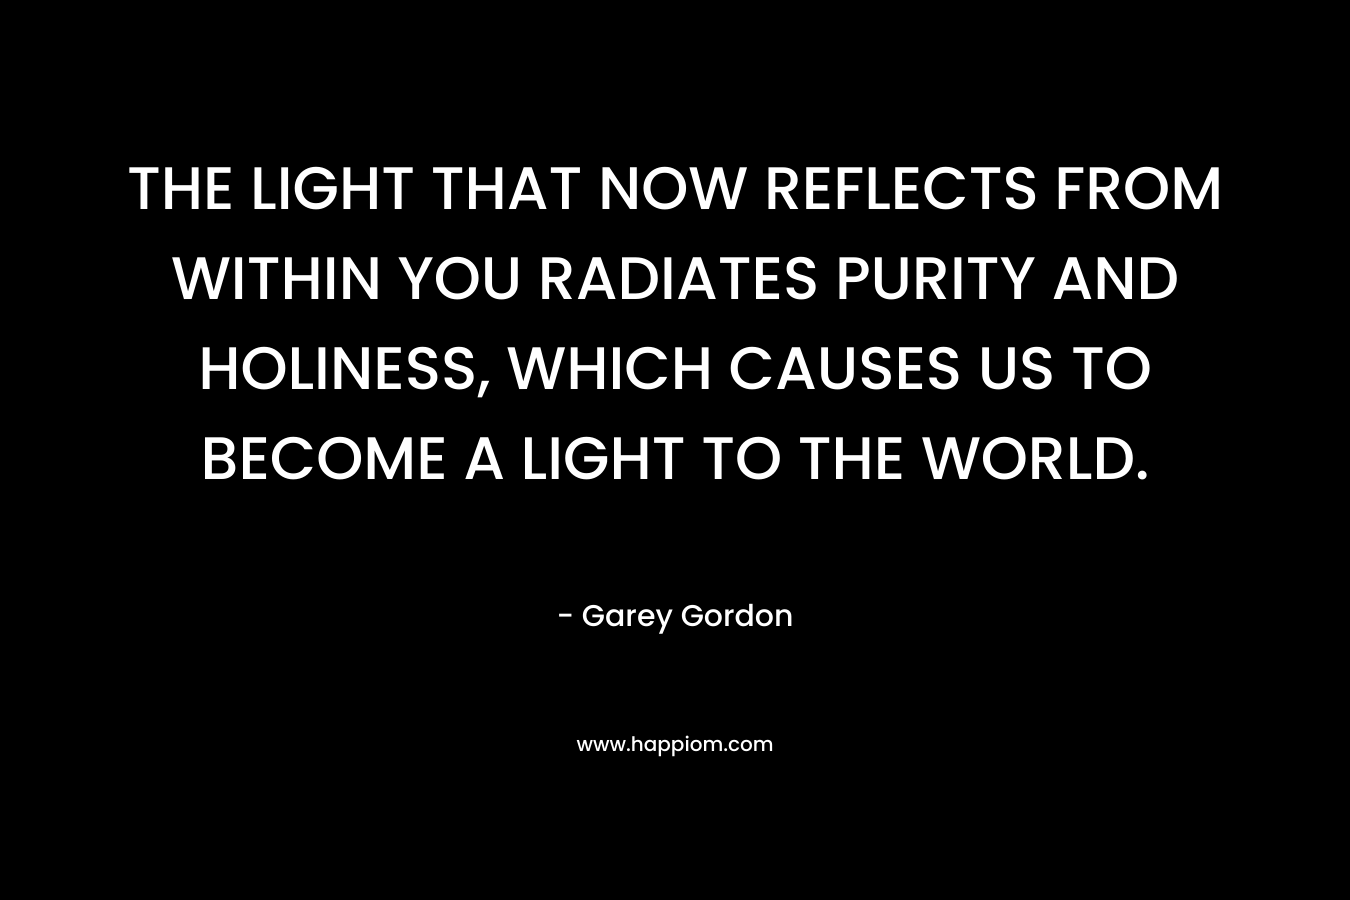 THE LIGHT THAT NOW REFLECTS FROM WITHIN YOU RADIATES PURITY AND HOLINESS, WHICH CAUSES US TO BECOME A LIGHT TO THE WORLD. – Garey Gordon